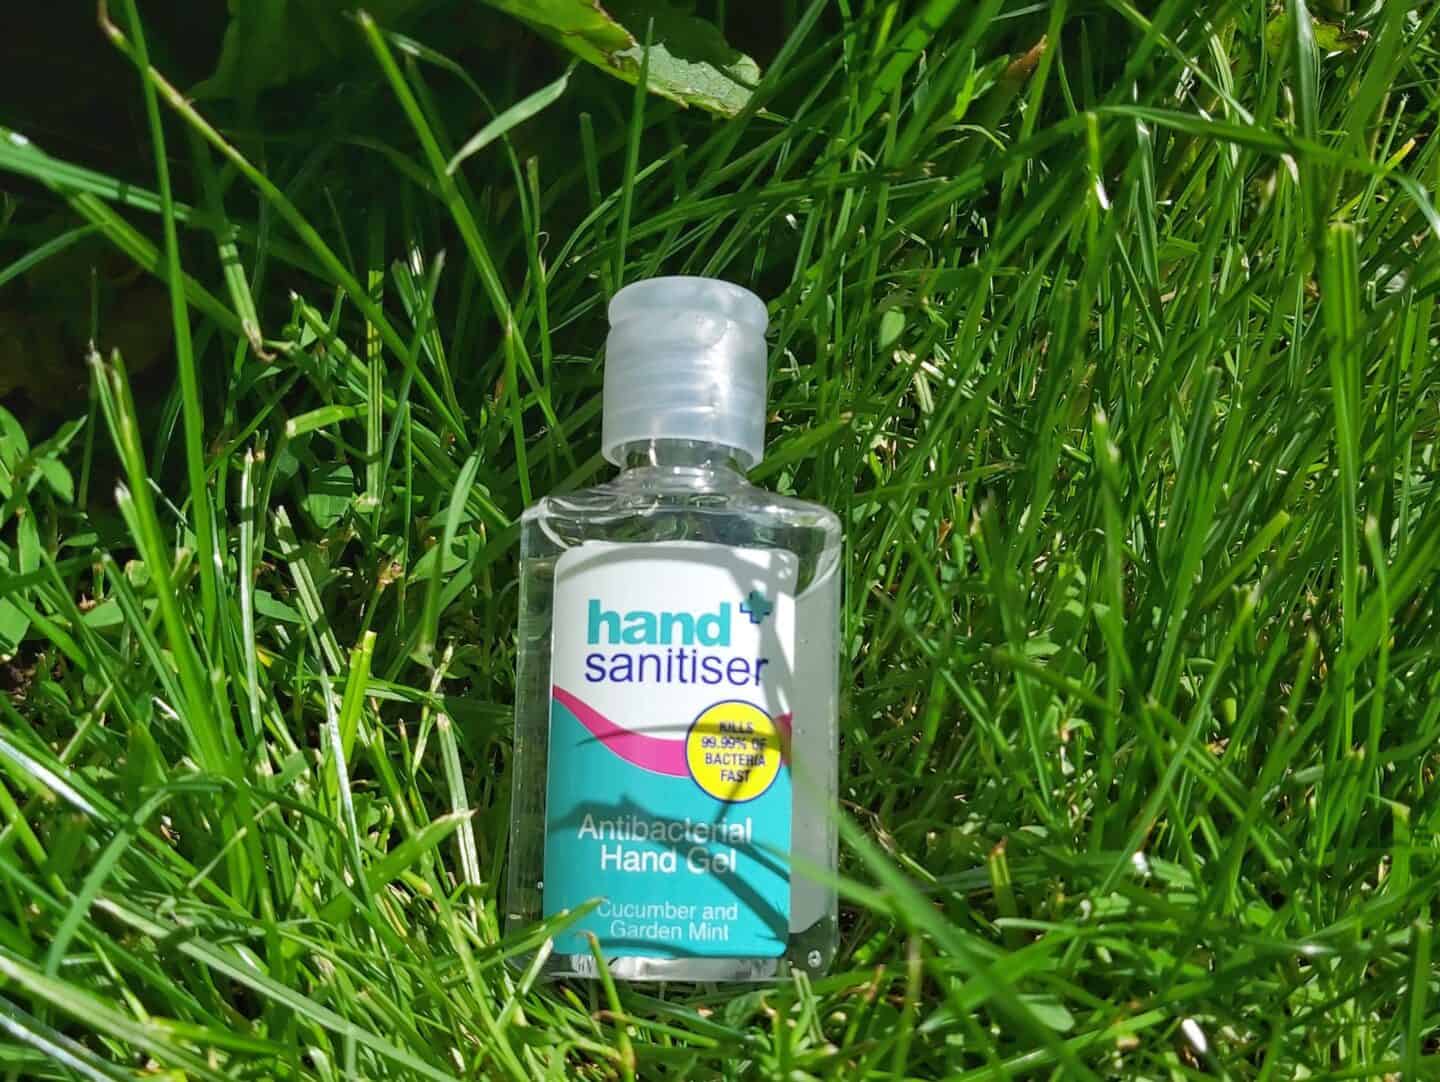 Safe and Sound Health hand gel lying in the grass